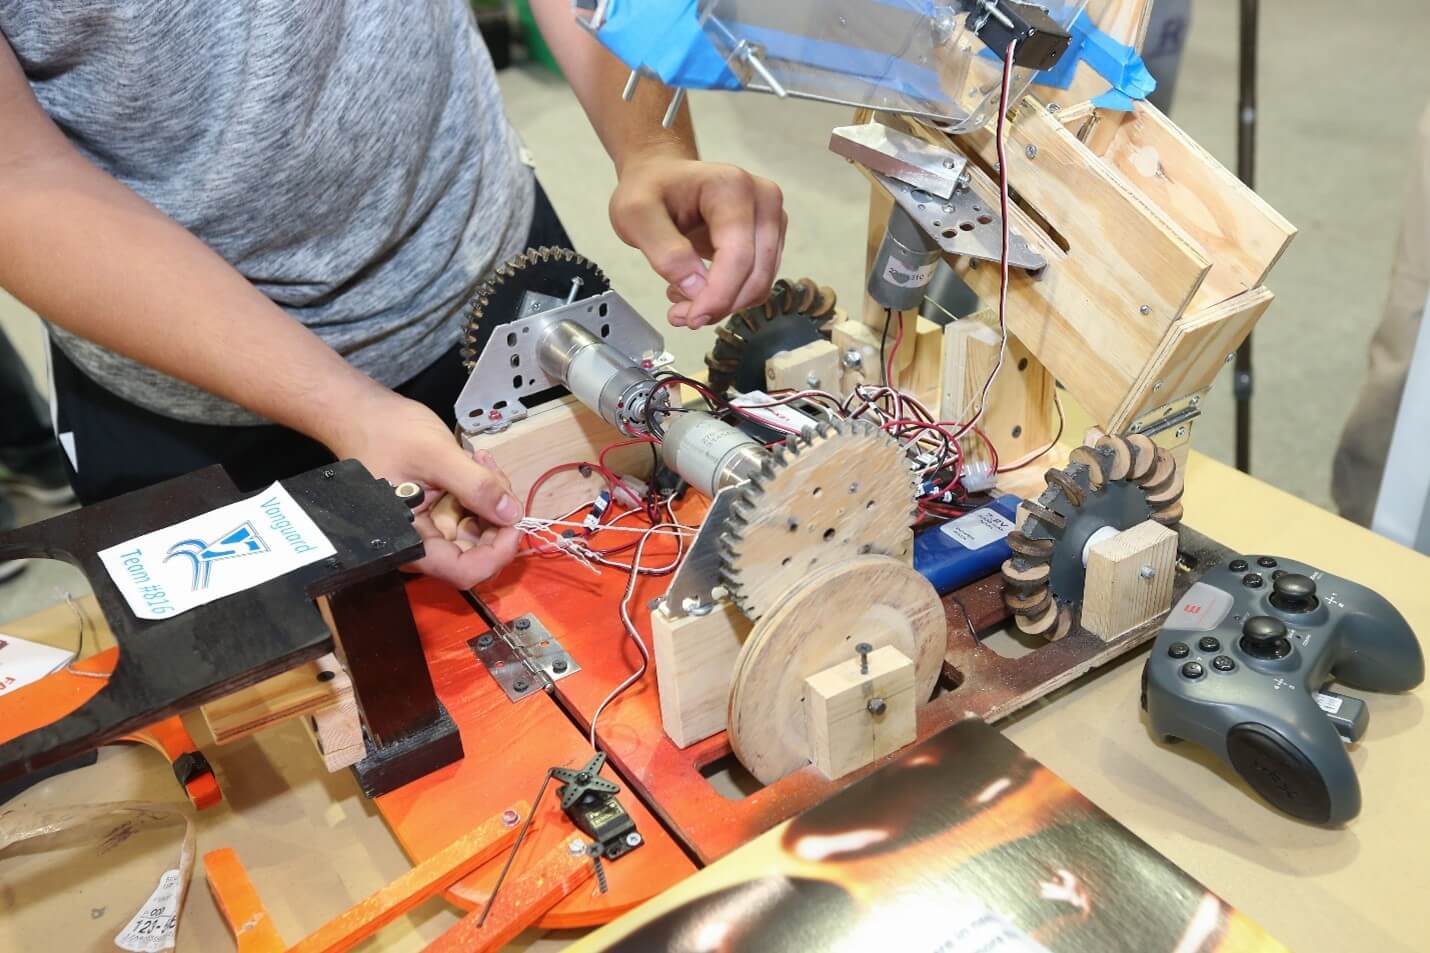 Experience hands-on engineering for the future at these US universities